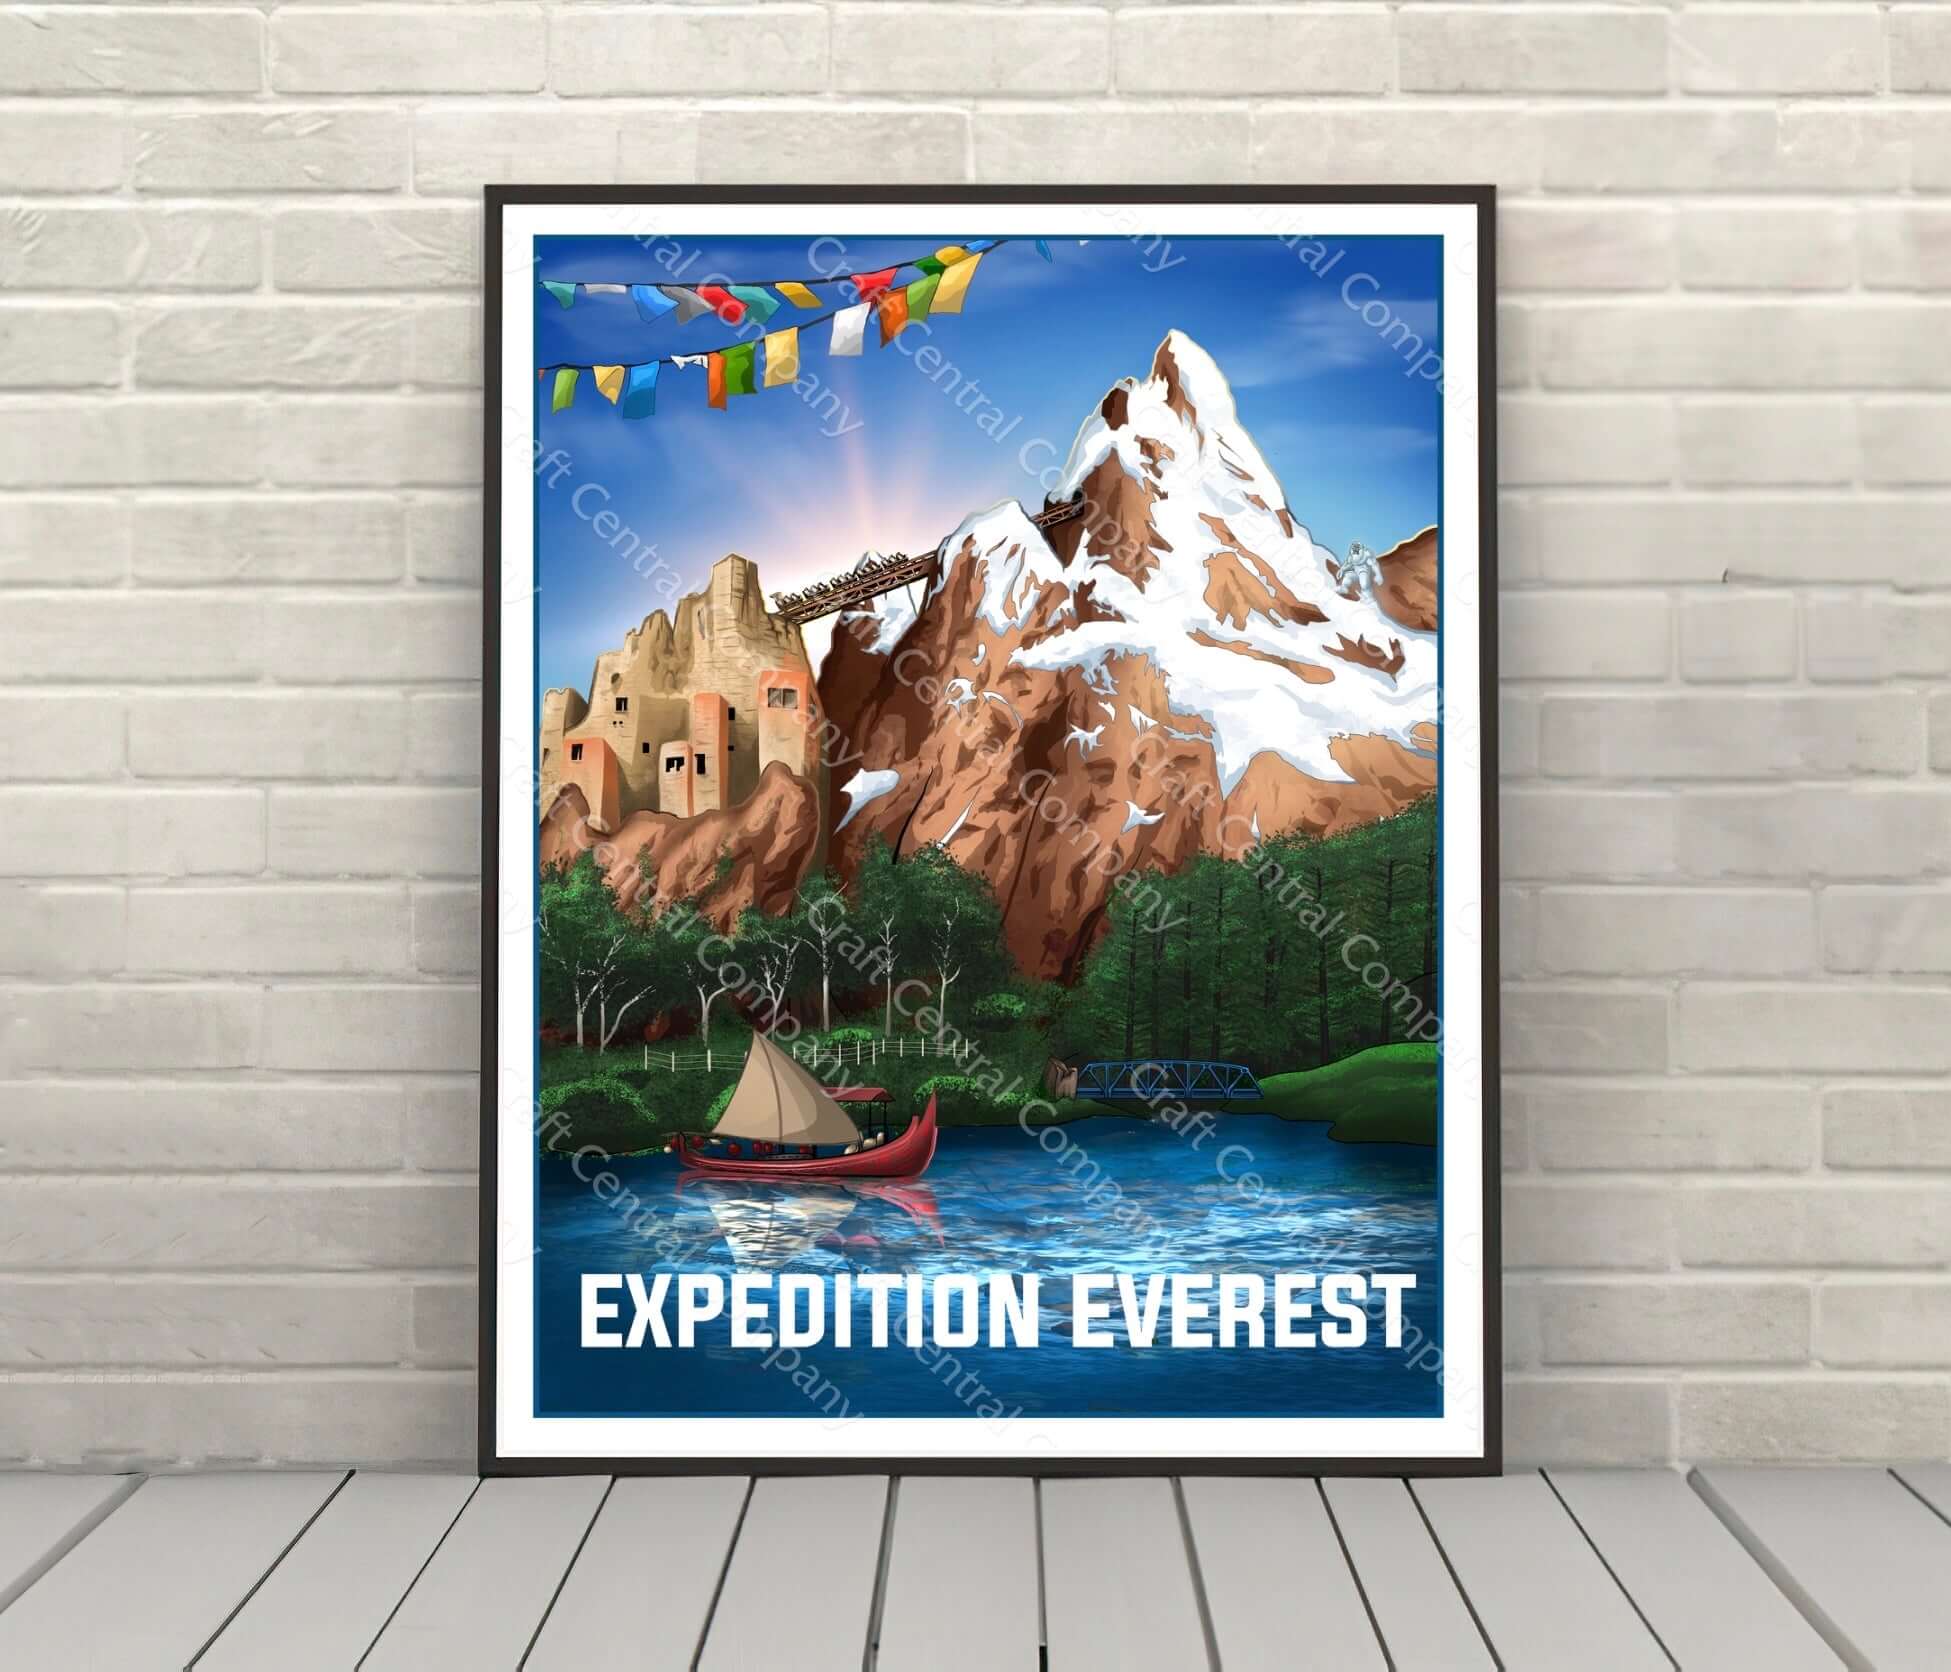 Expedition Everest Attraction Poster Disney World...